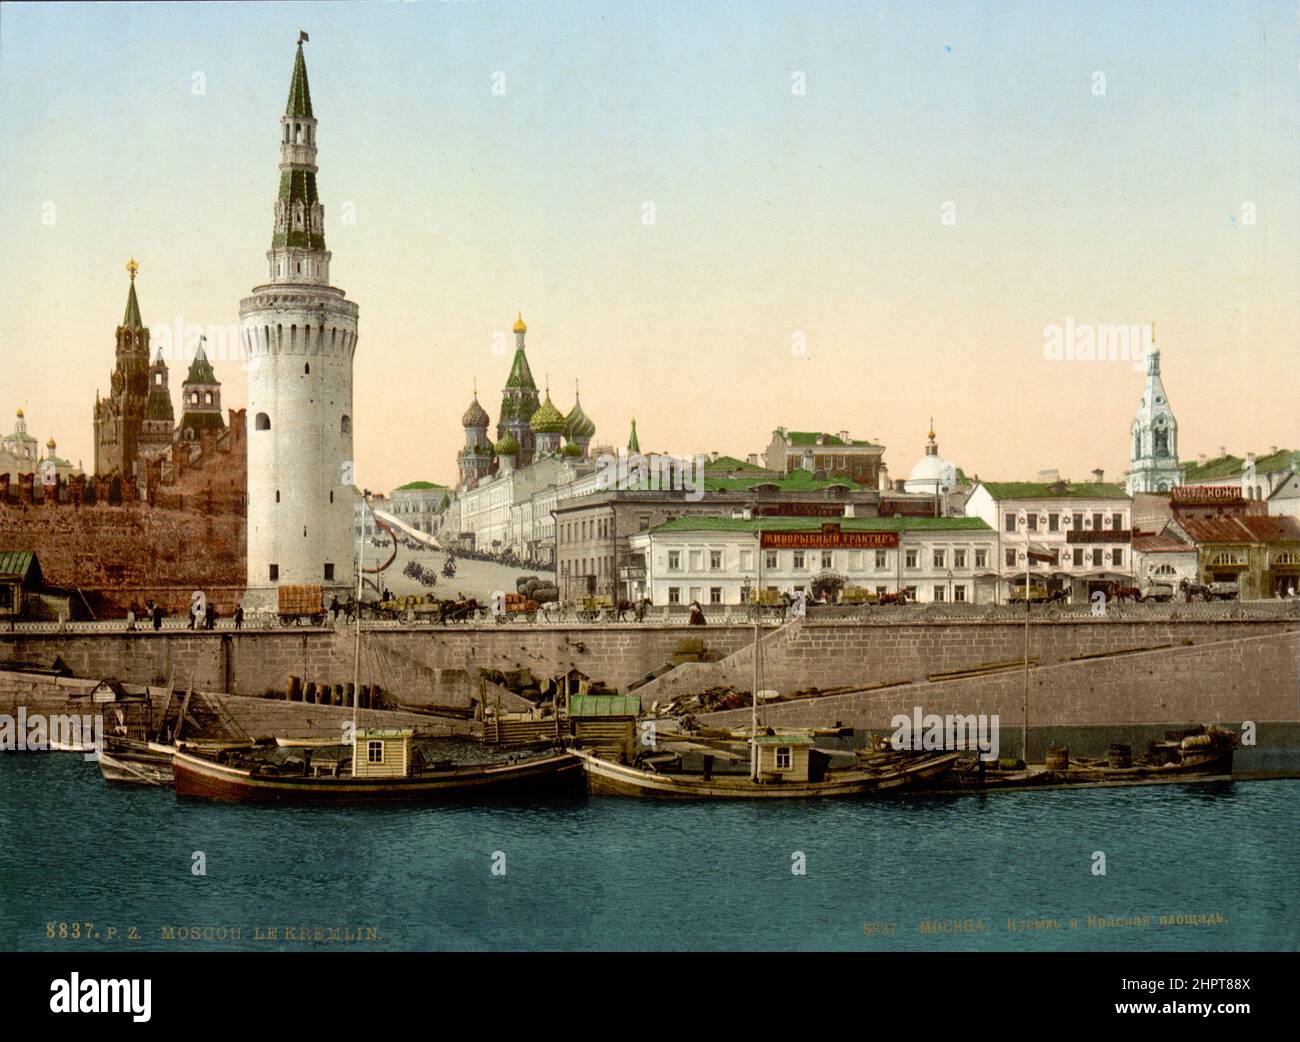 19th-century photo of Moscow Kremlin with Spasskaya Tower (background), Vodovzvodnaya Tower in foreground and Saint Basil's Cathedral. Russian Empire. Stock Photo